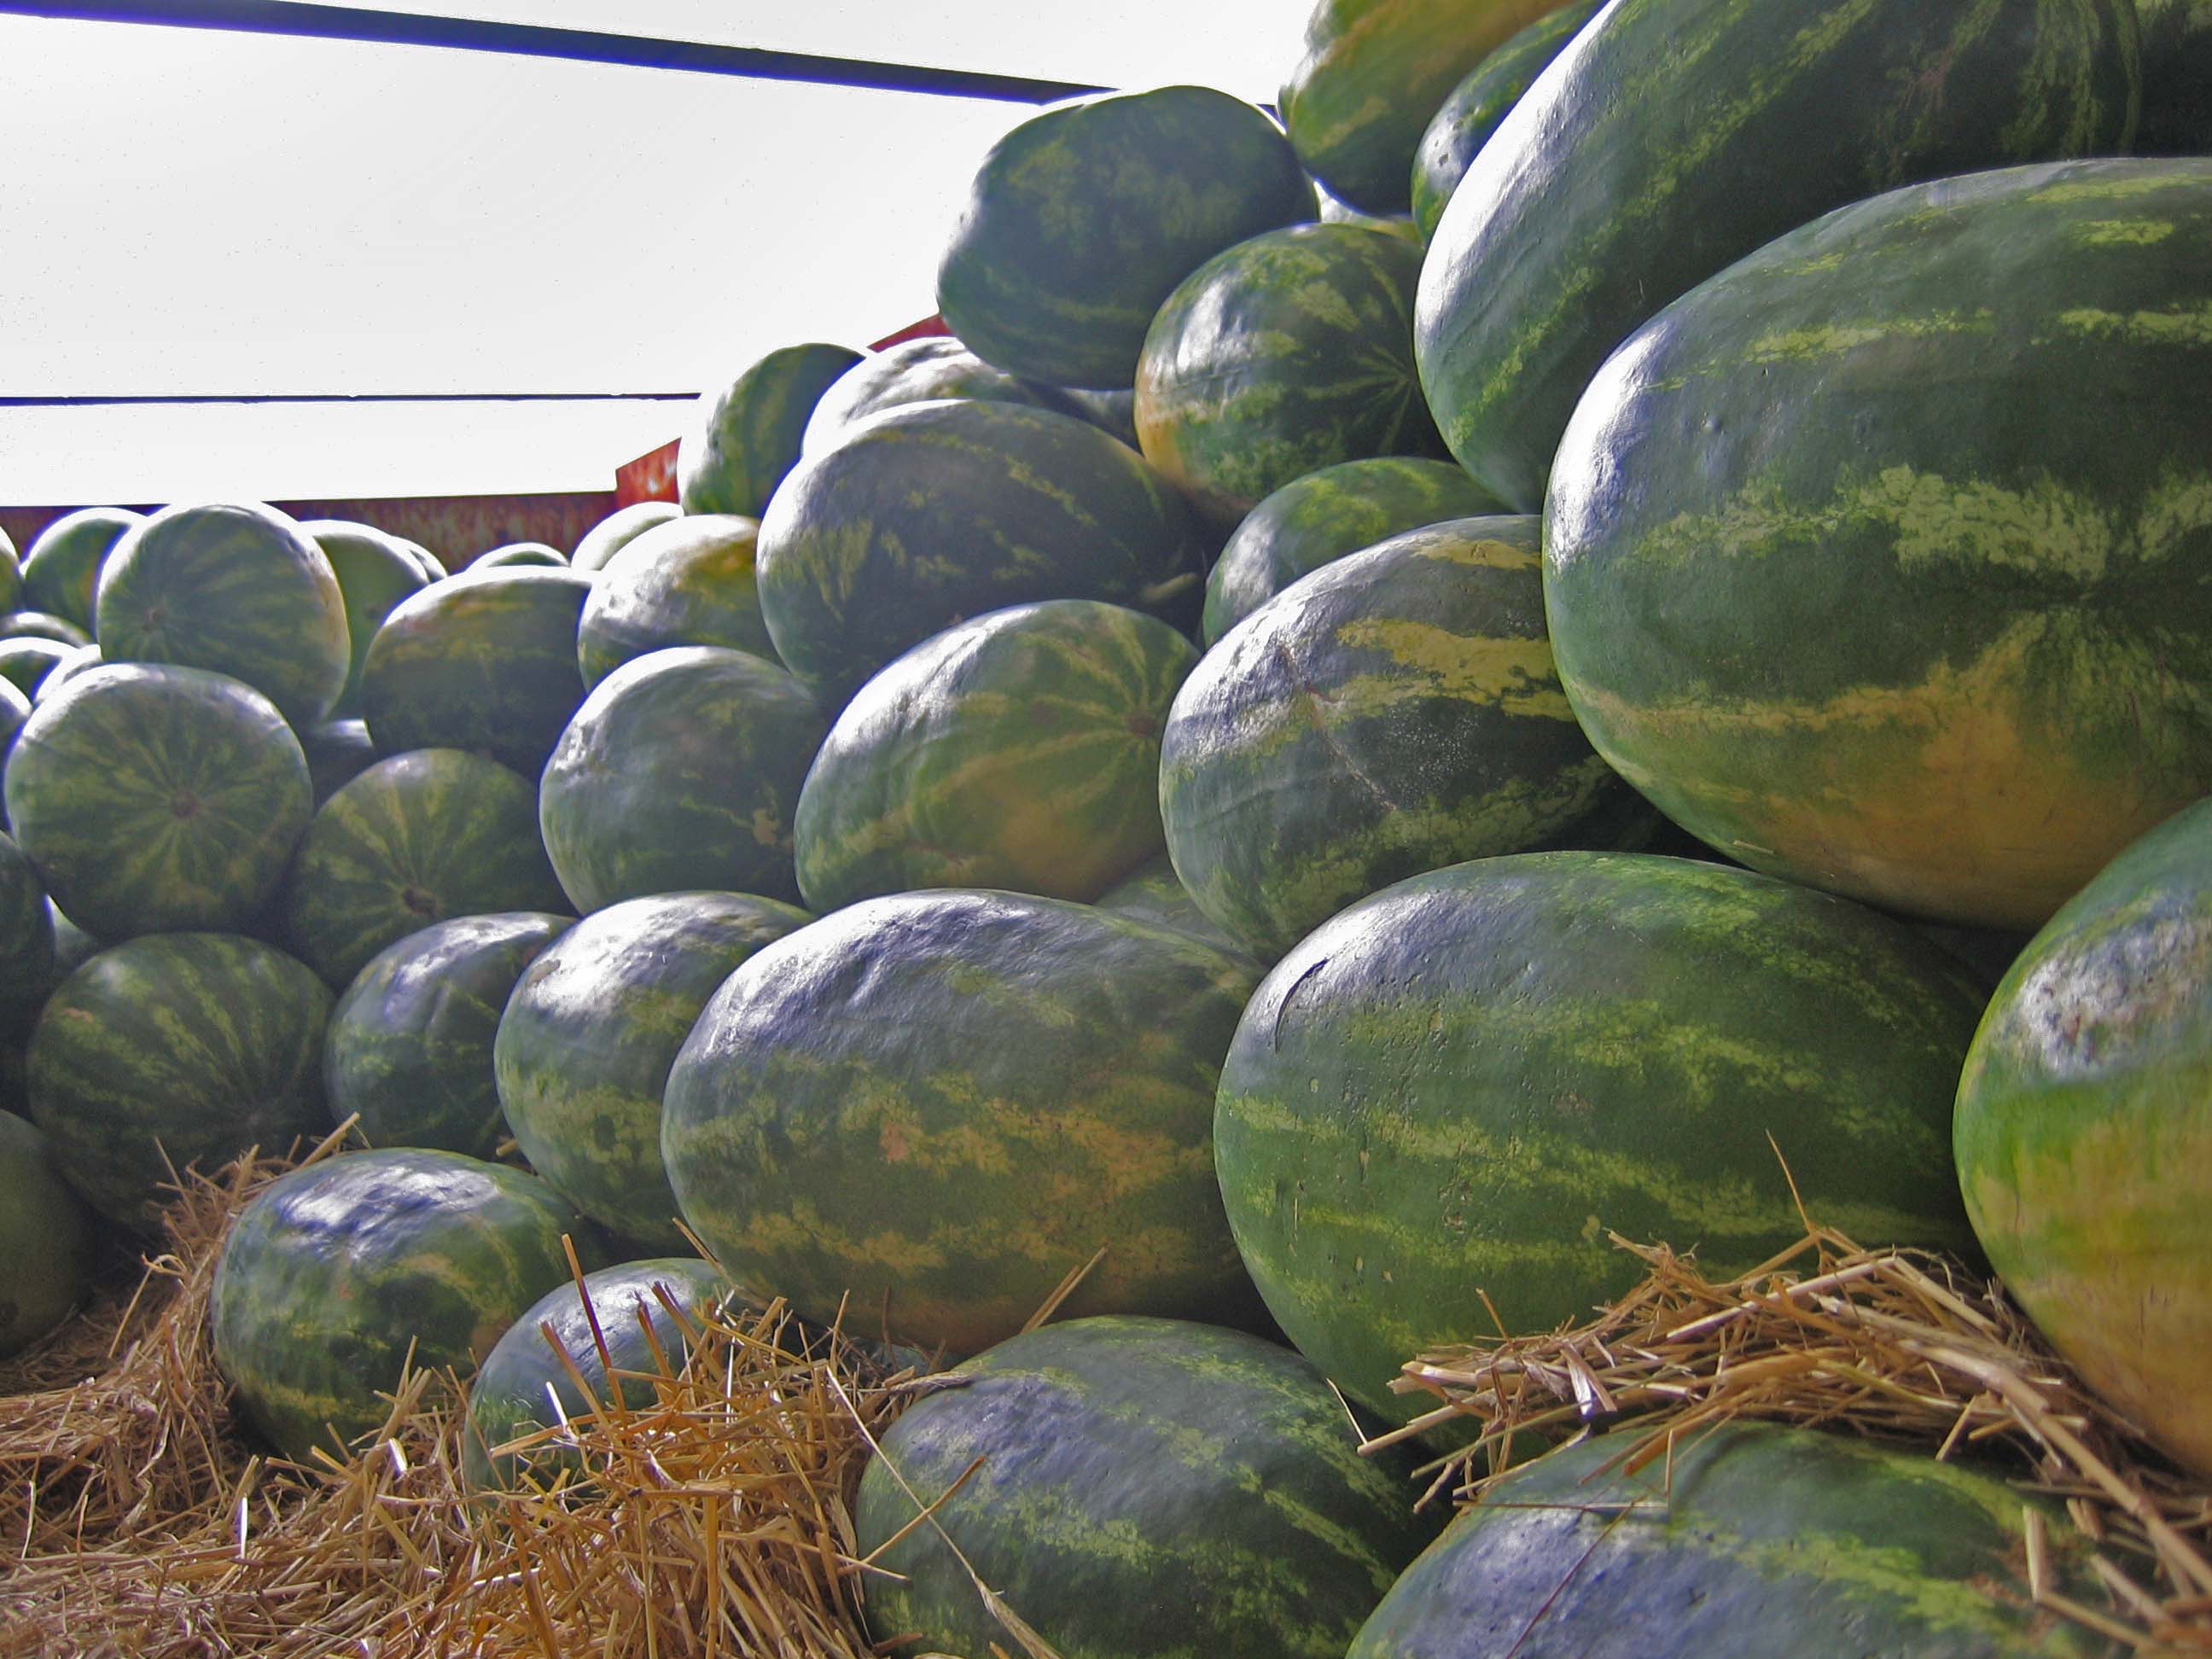 Georgia watermelons harvested for delivery.